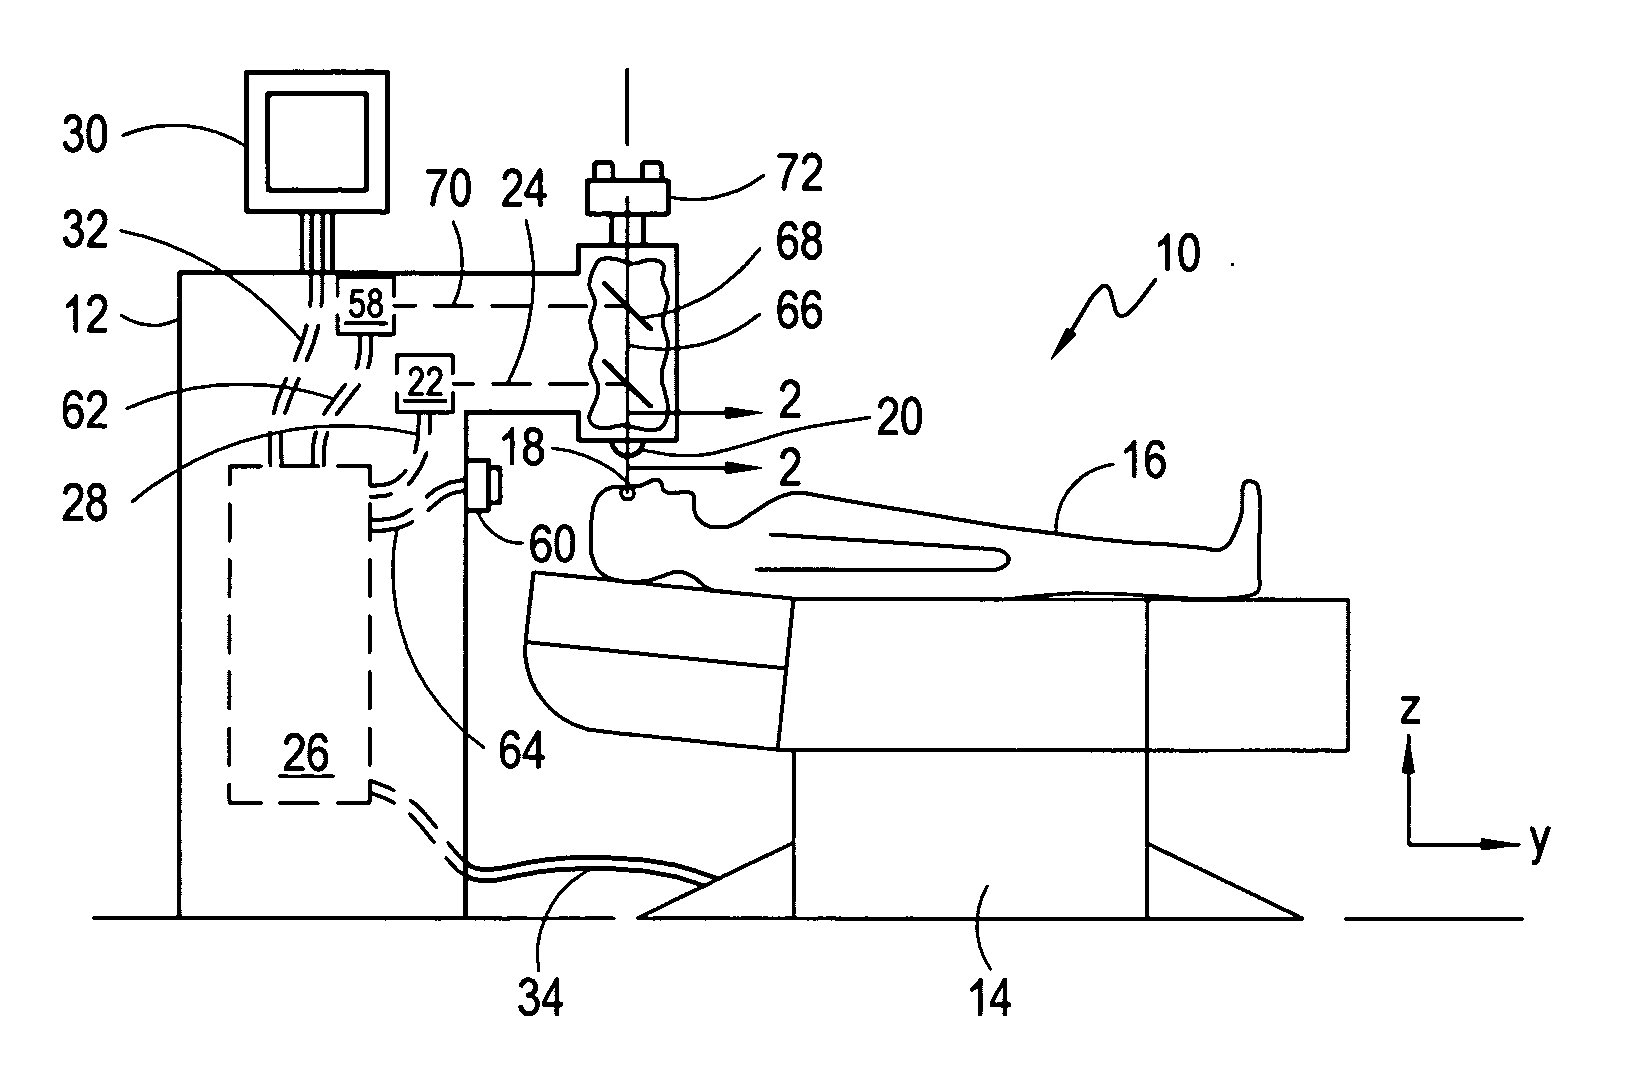 Device and method for aligning an eye with a surgical laser